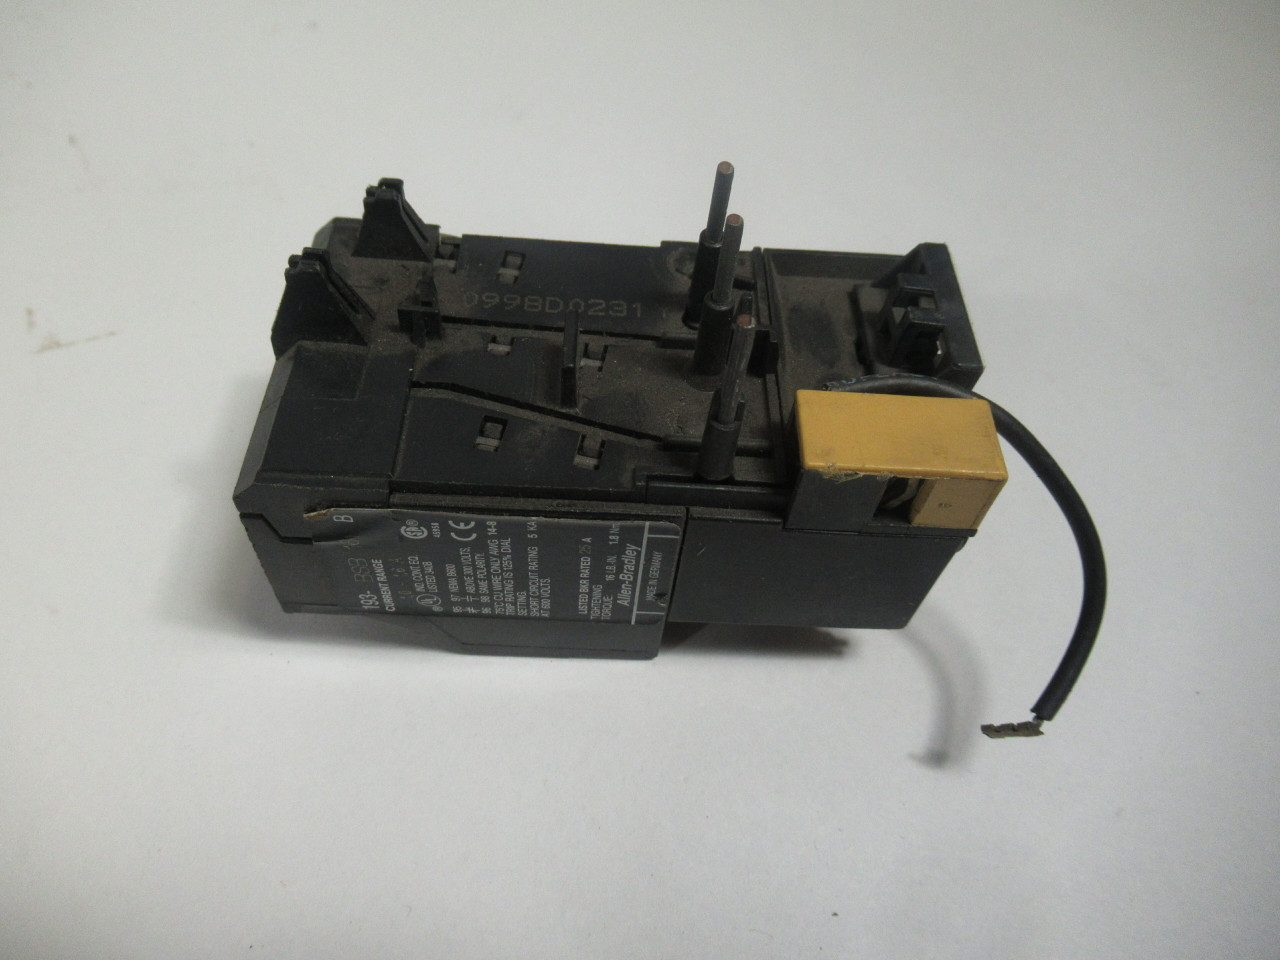 Allen-Bradley 193-BSB16 Series A Overload Relay 1.0-1.6A 660V USED